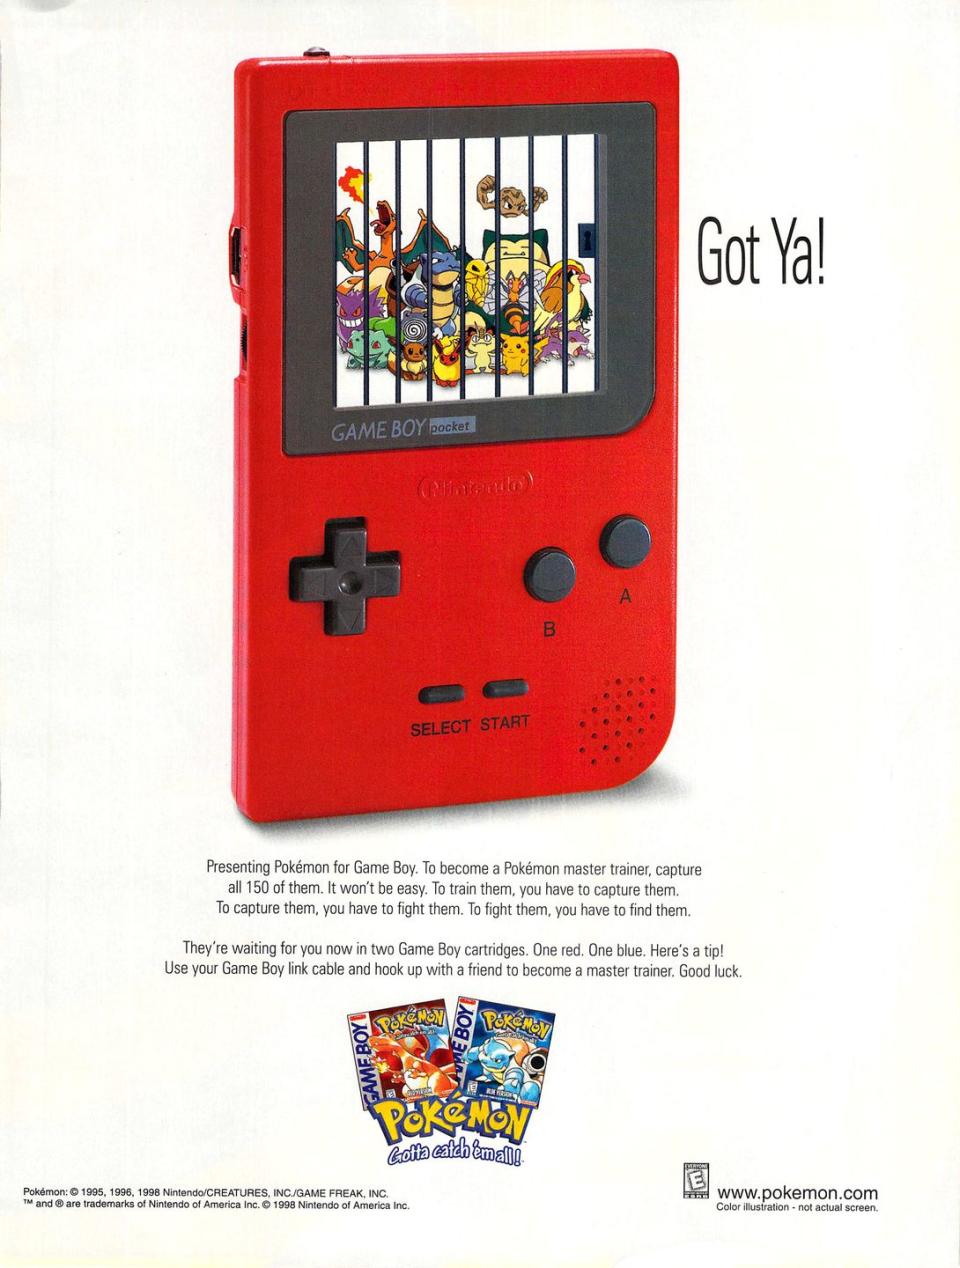 1996: Pokémon Red and Blue